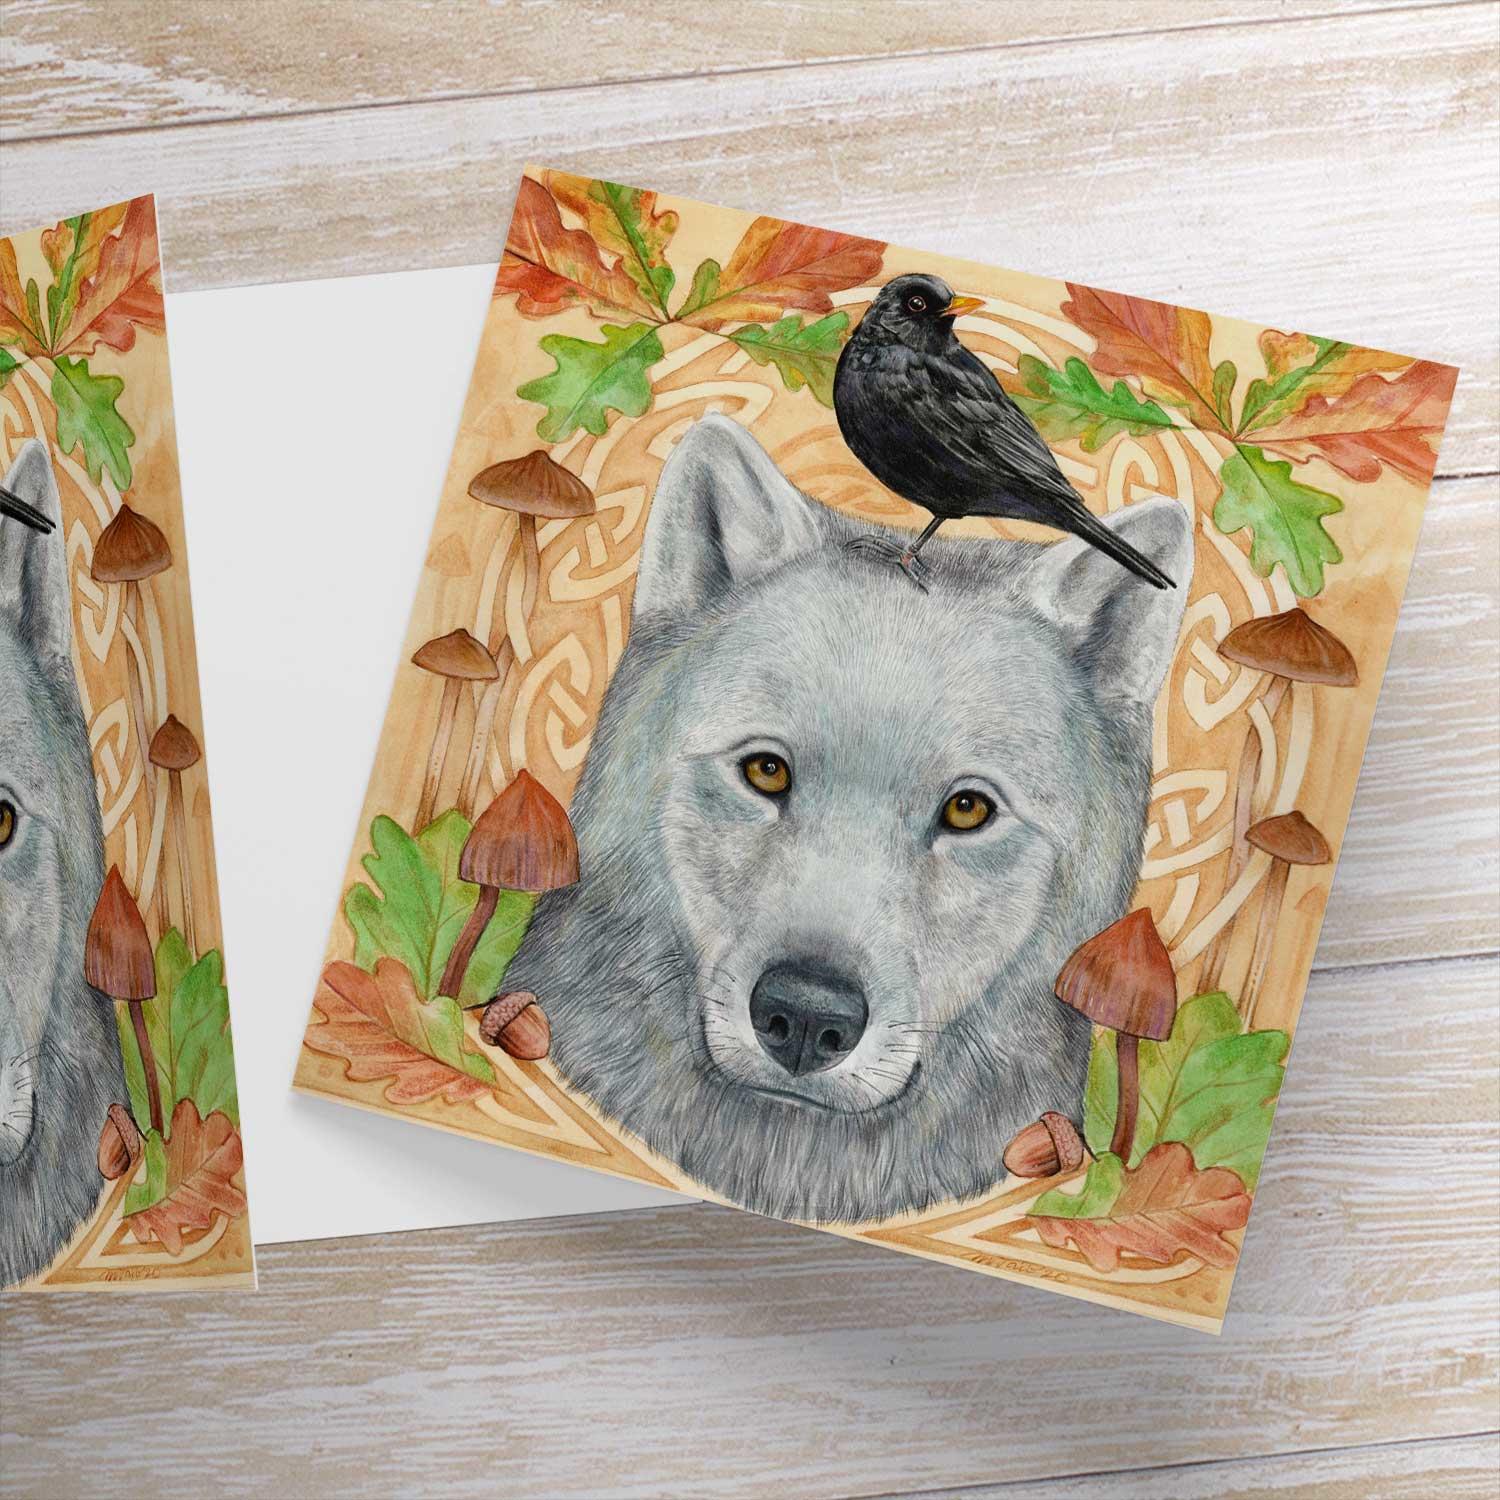 Wolf and Blackbird Greeting Card from an original painting by artist Marjory Tait